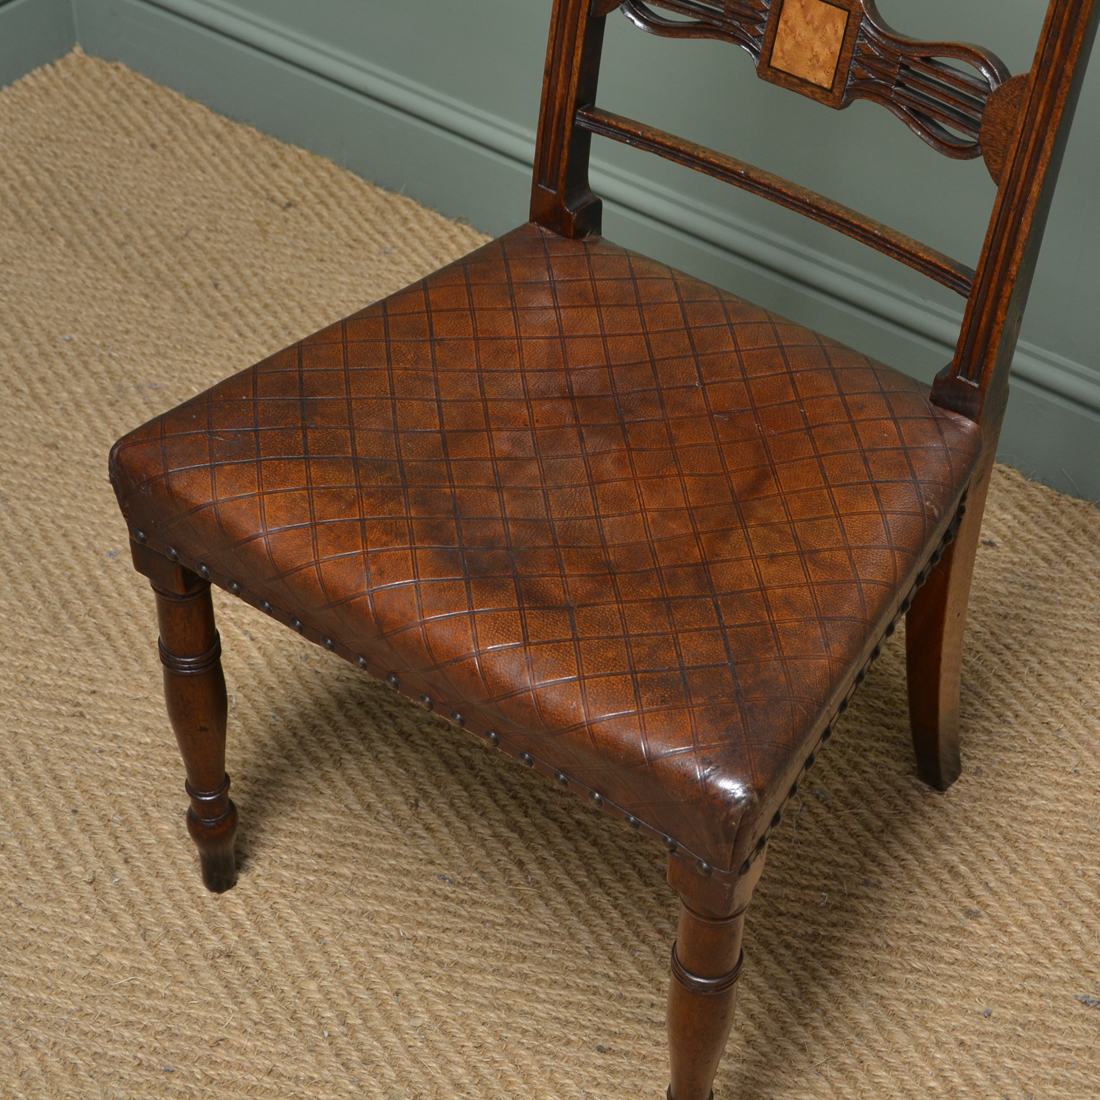 Striking Set of Eight Regency Antique Mahogany Dining Chairs - Image 10 of 10